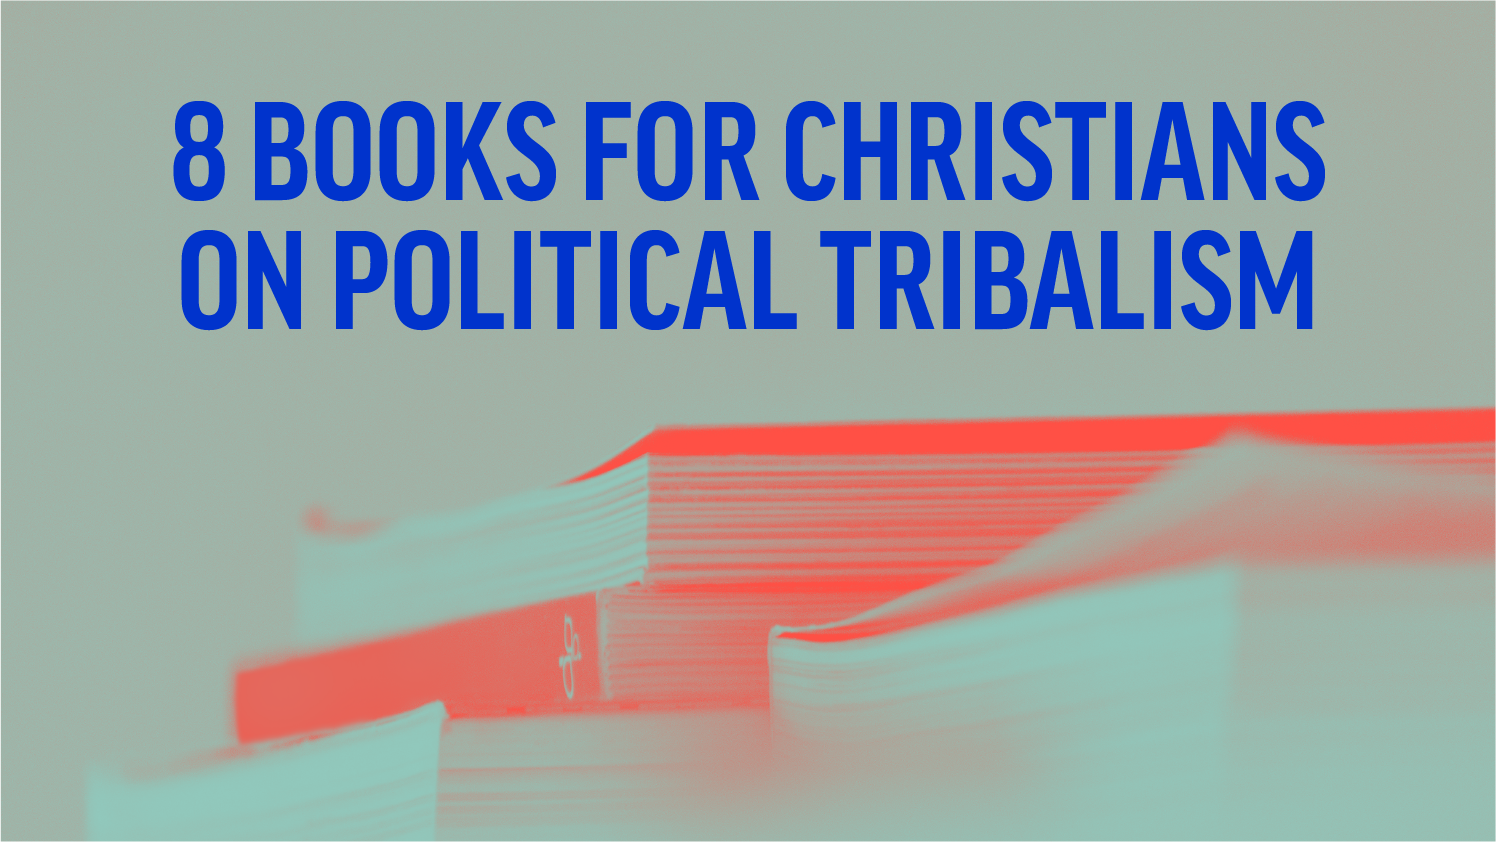 8 Books for Christians on Political Tribalism